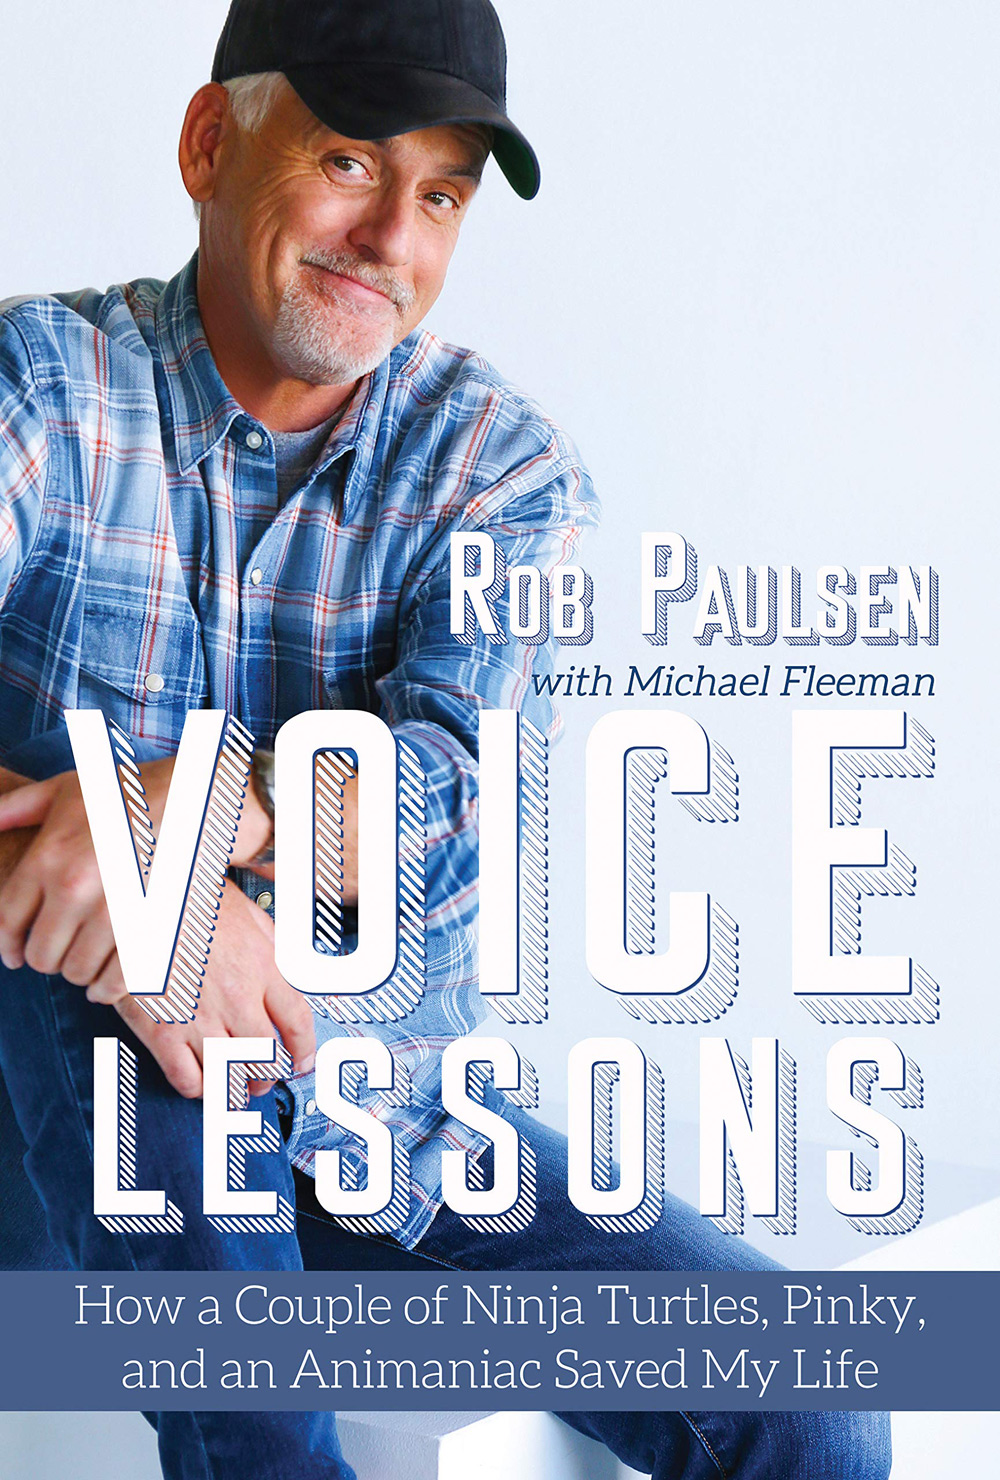 Voice Lessons: How a Couple of Ninja Turtles, Pinky, and an Animaniac Saved My Life, by Rob Paulsen